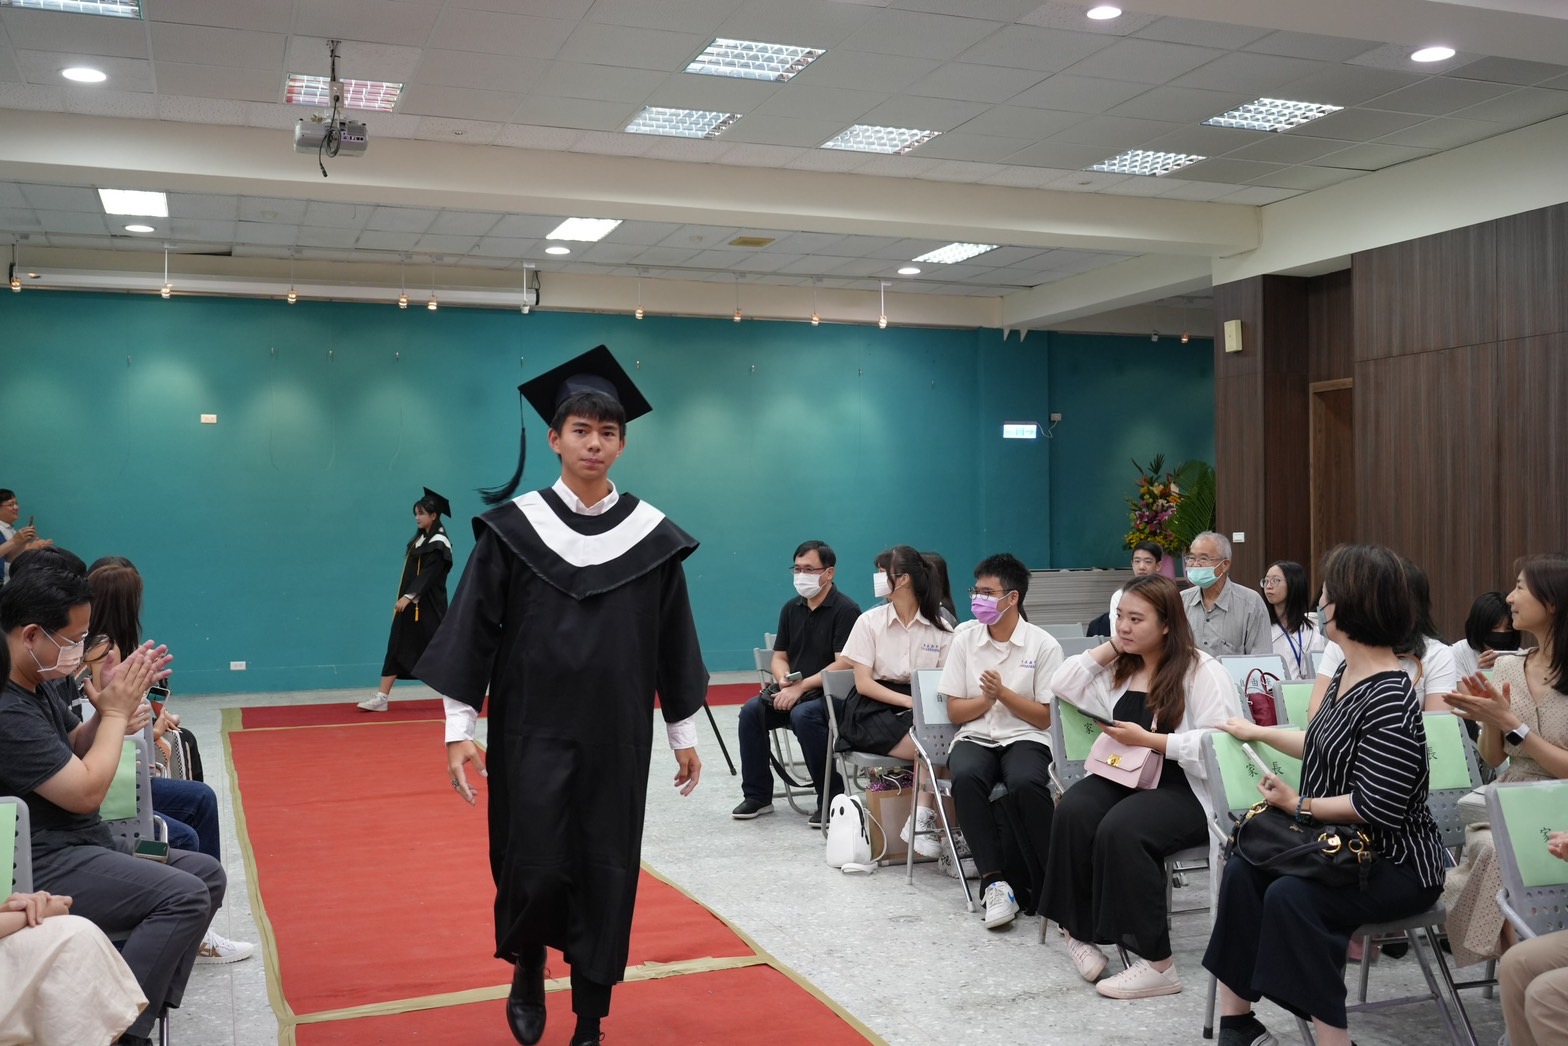 The Joint Graduation Ceremony of the JDP (Joint Degree Program) and IFY (International Foundation Year) Programs